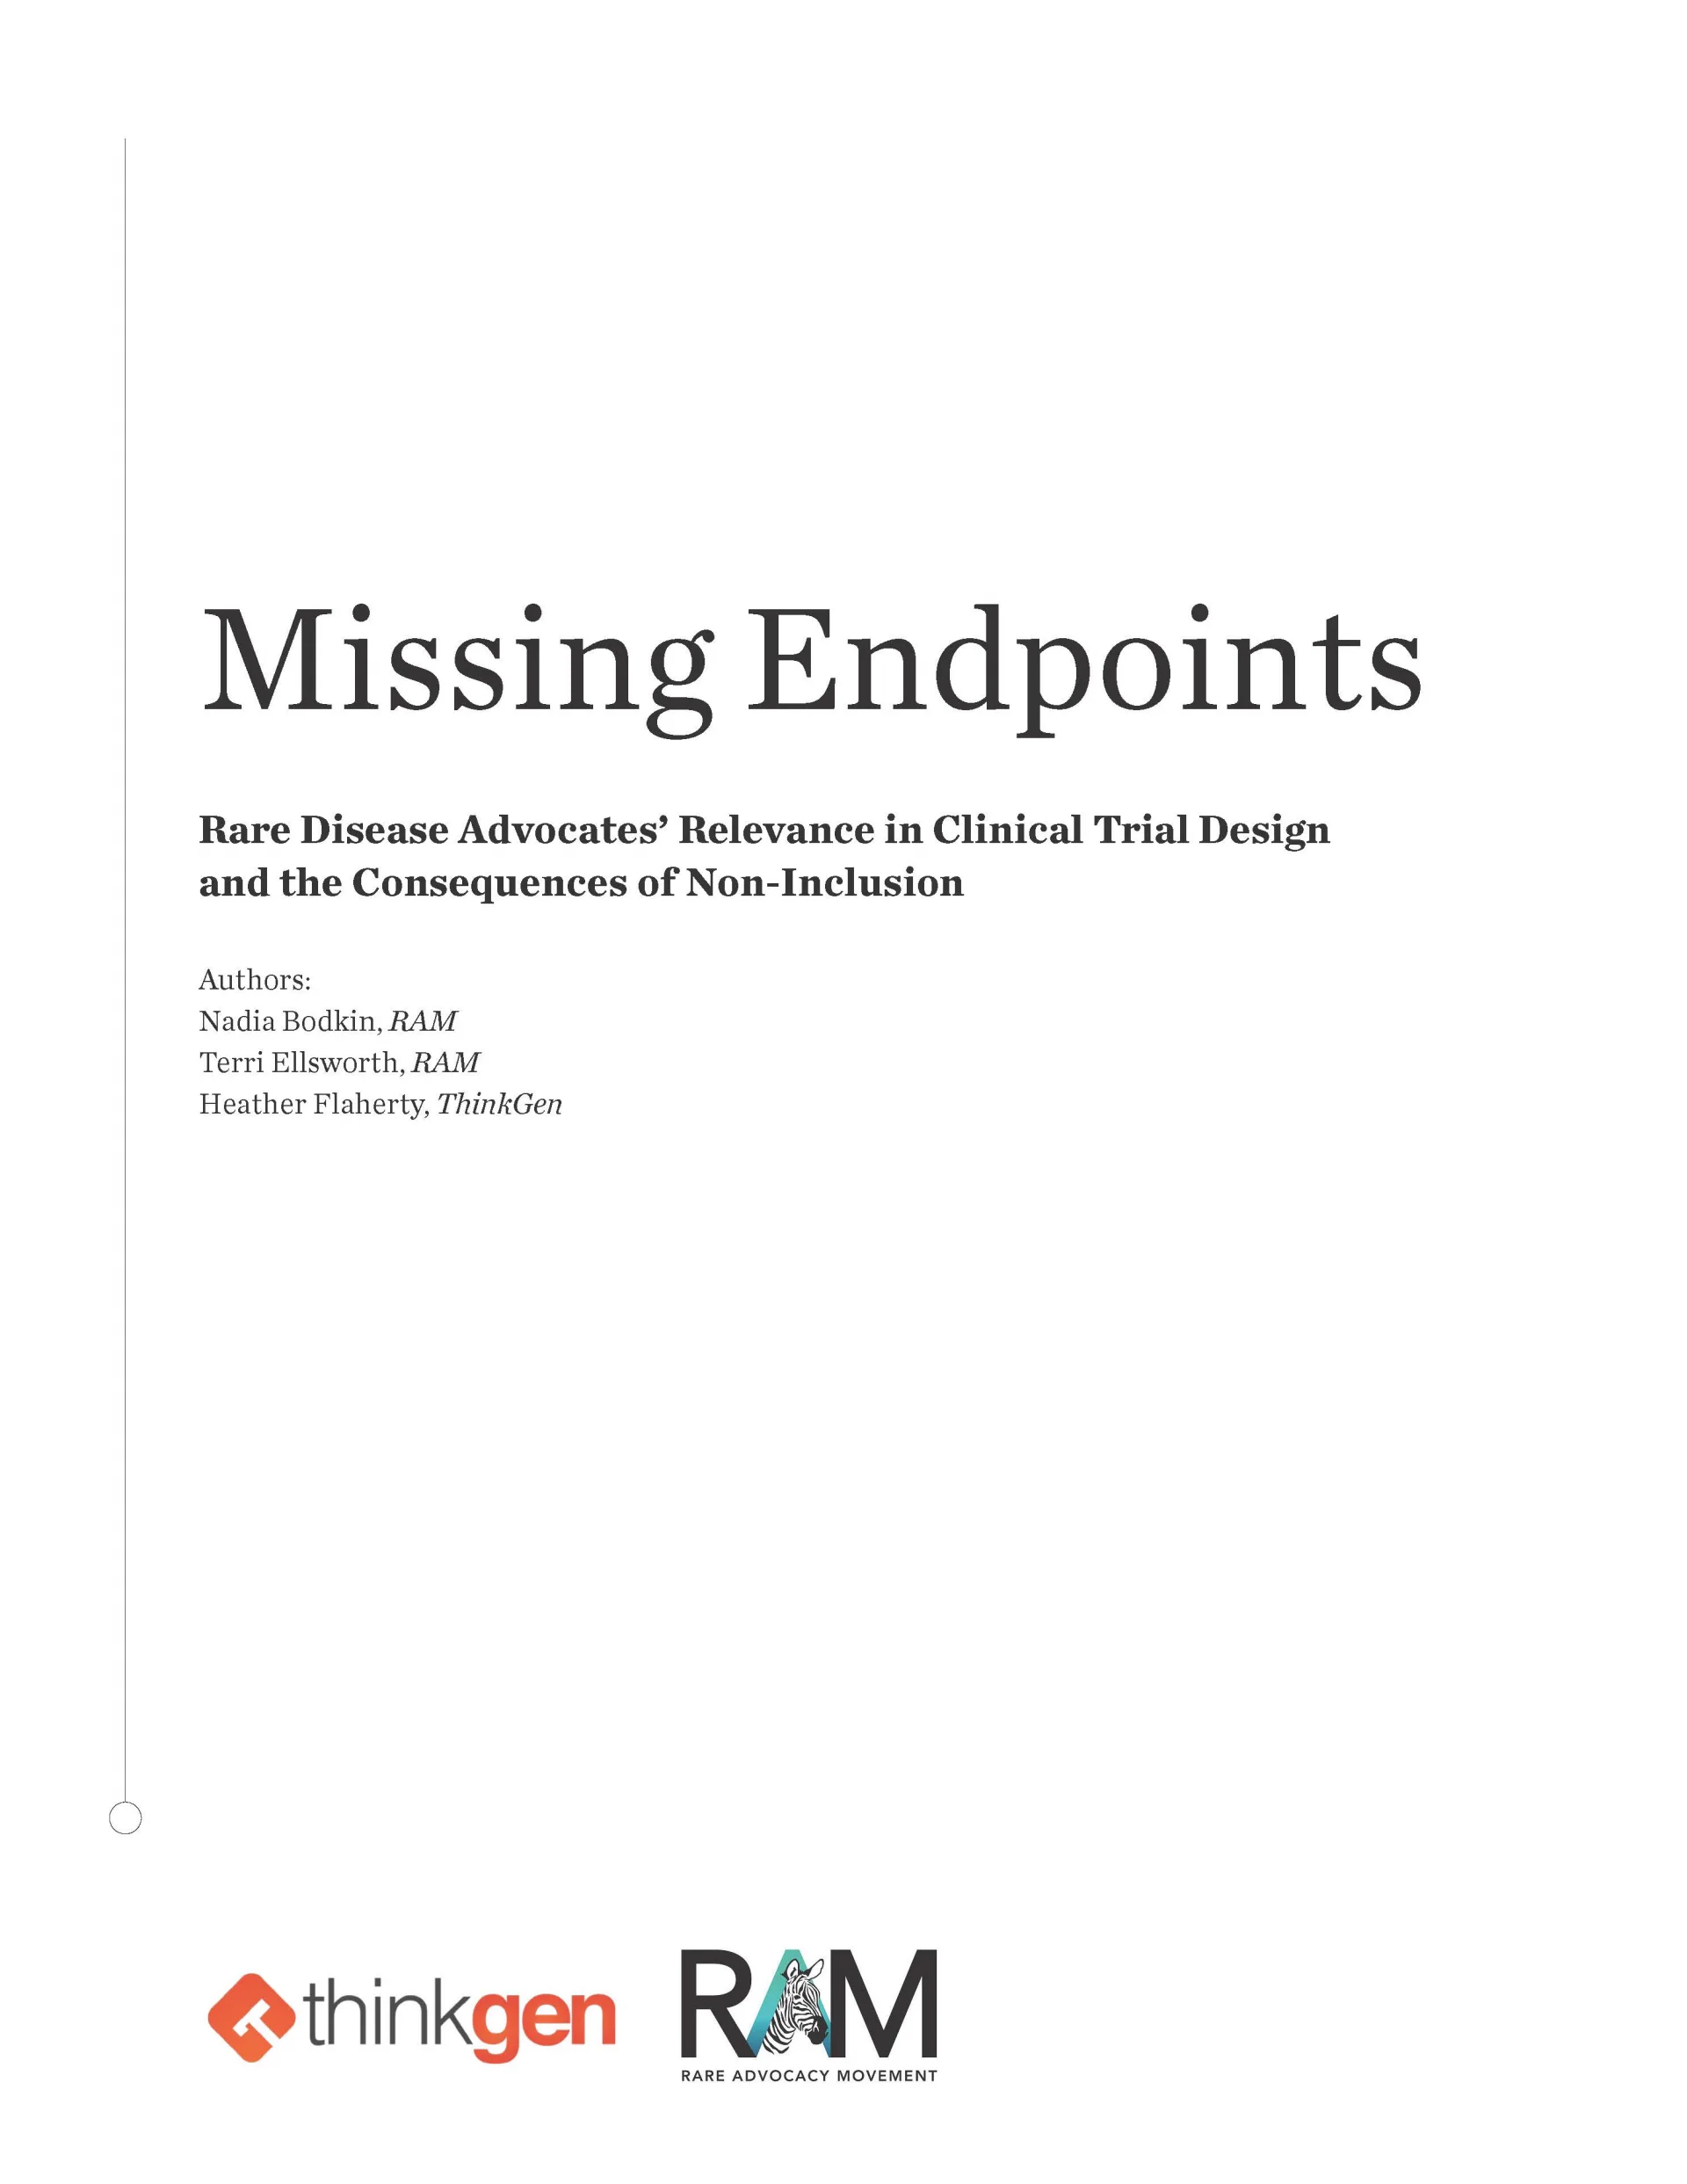 Missing Endpoints: Rare Disease Clinical Trial Design